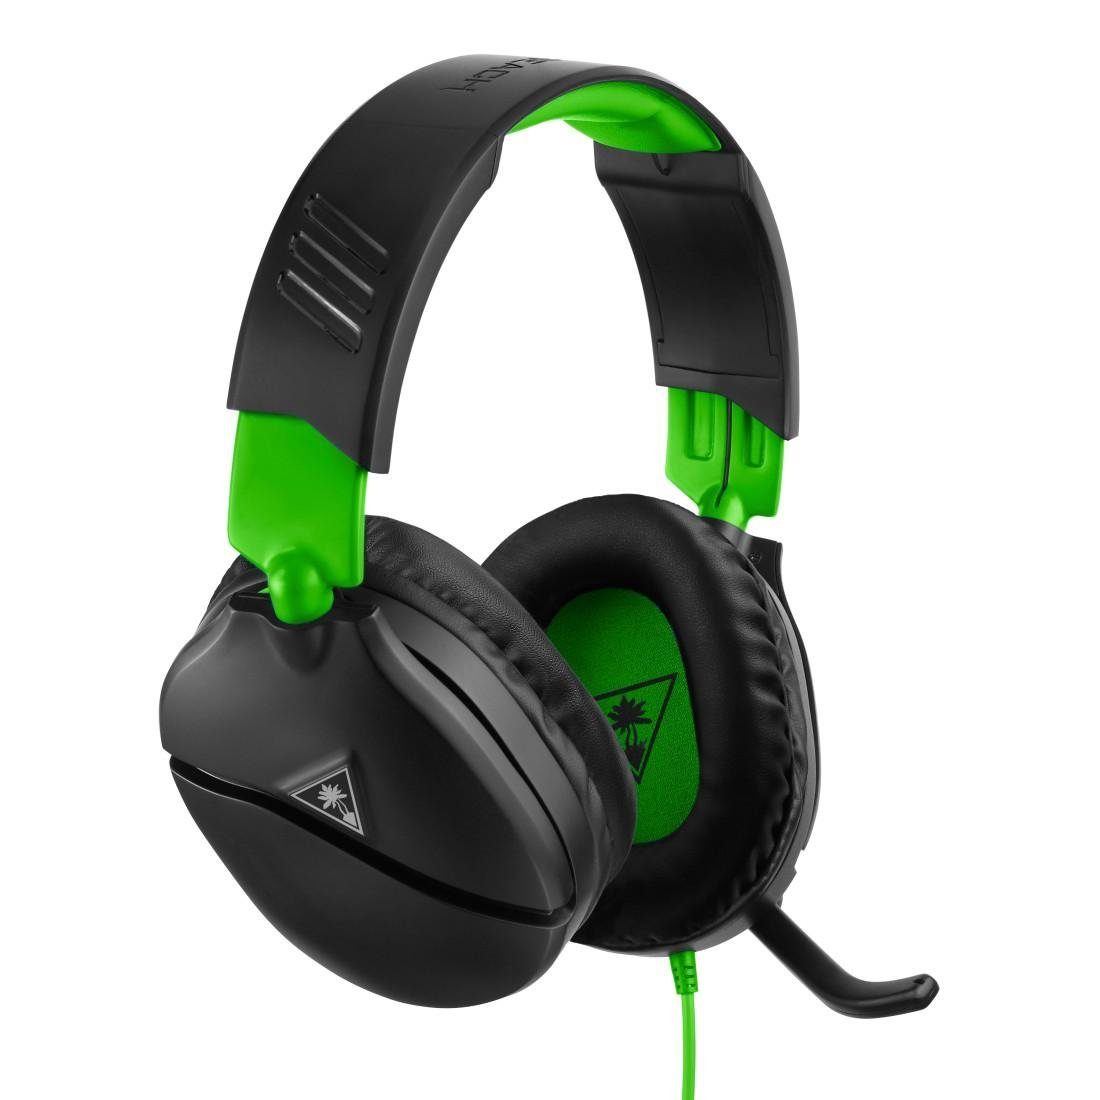 Turtle Beach Recon 70X Gaming-Headset